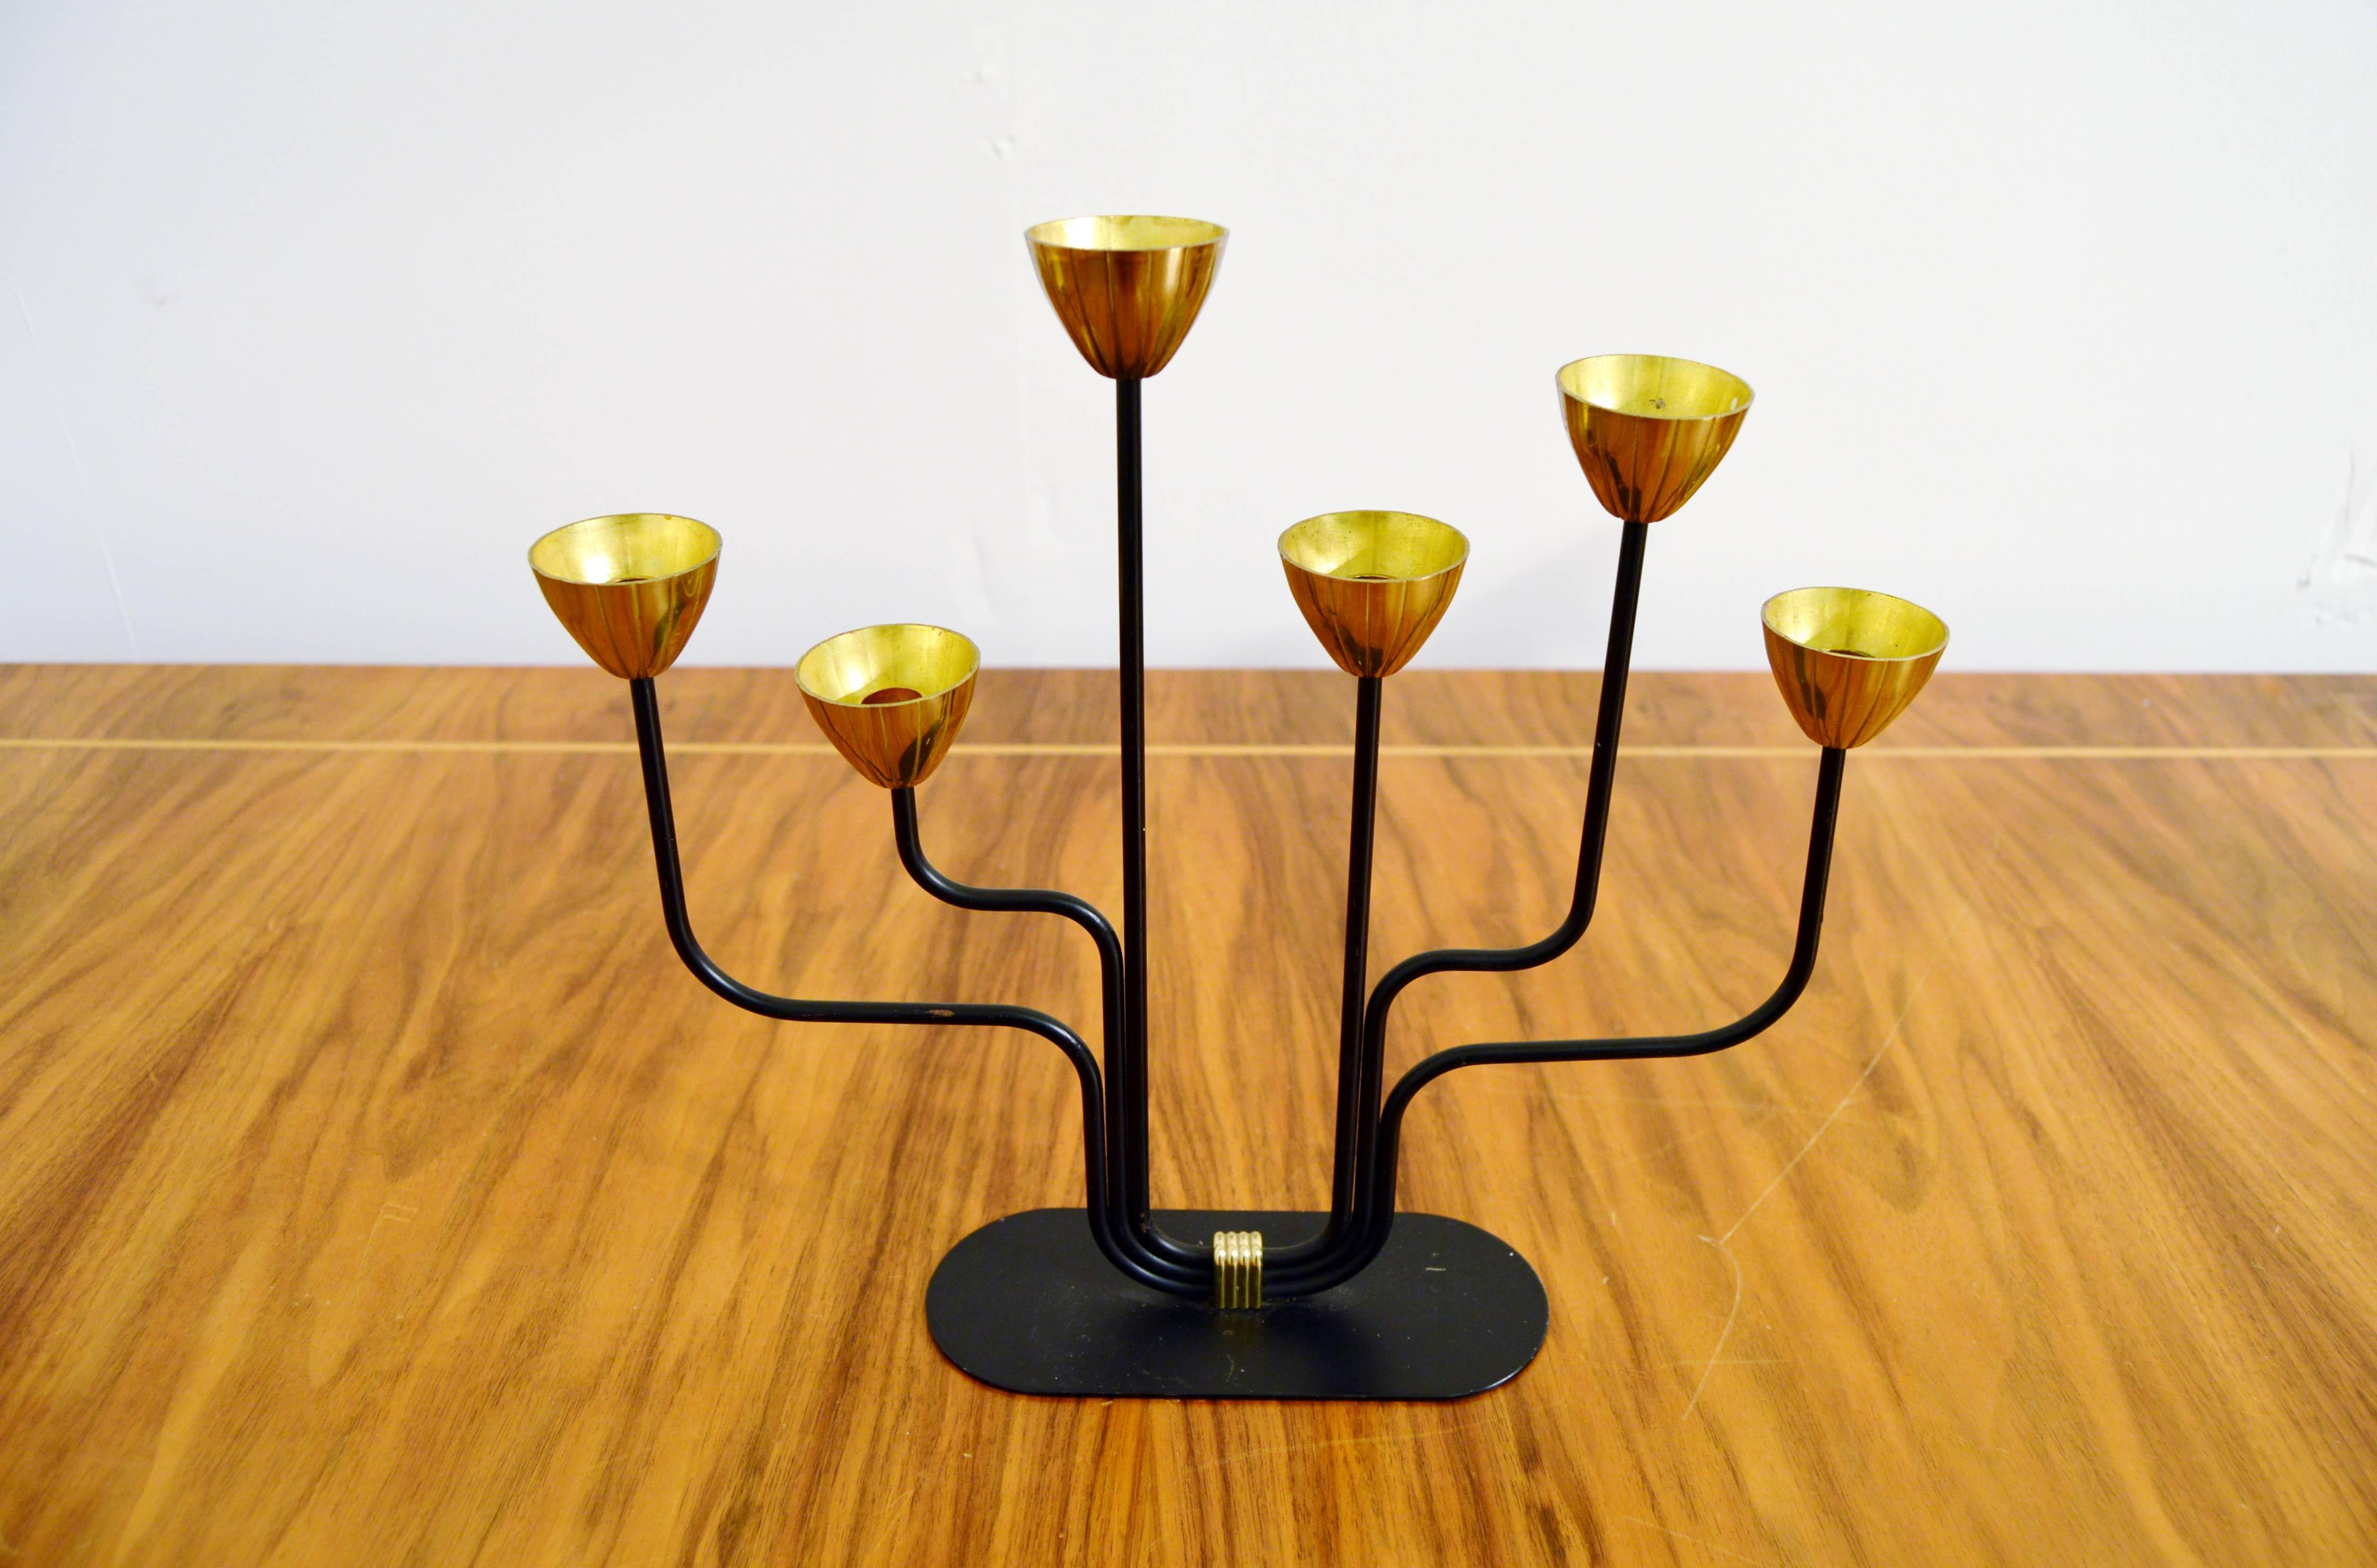 Candelabra by Gunnar Ander for Ystad Metall.
Year circa 1950.
Brass and black iron in very good vintage condition.